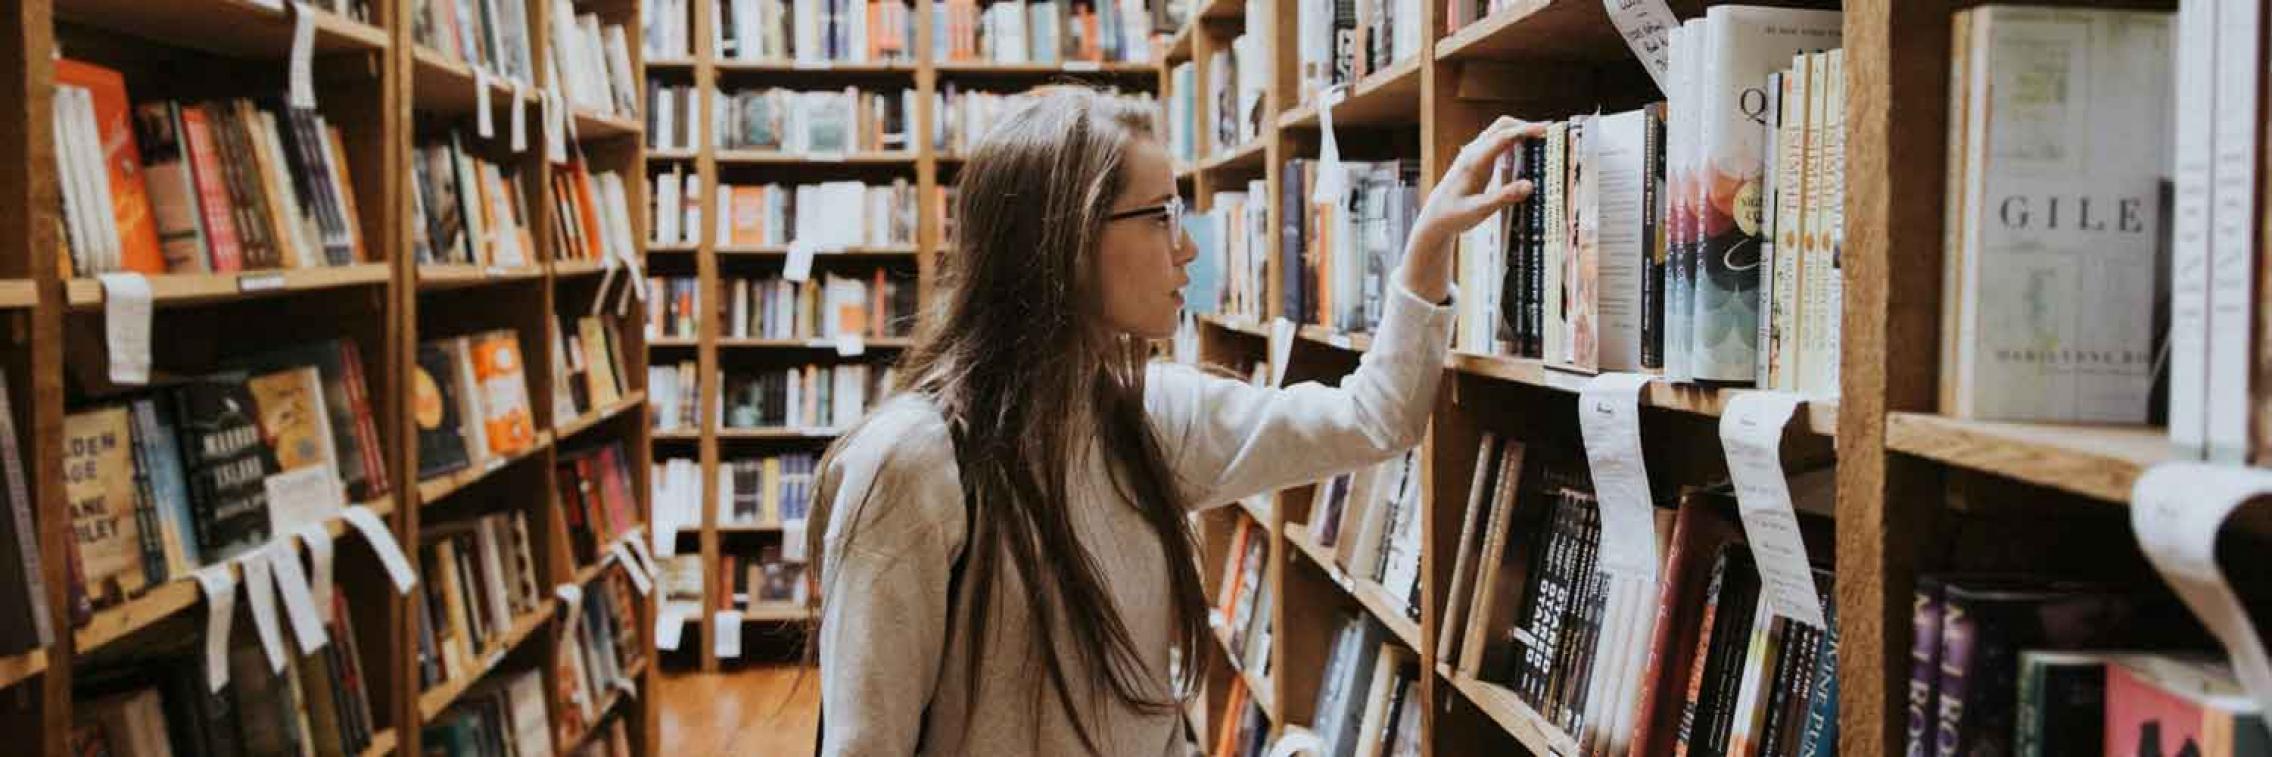 Lady with long hair, searching for books in a bookstore